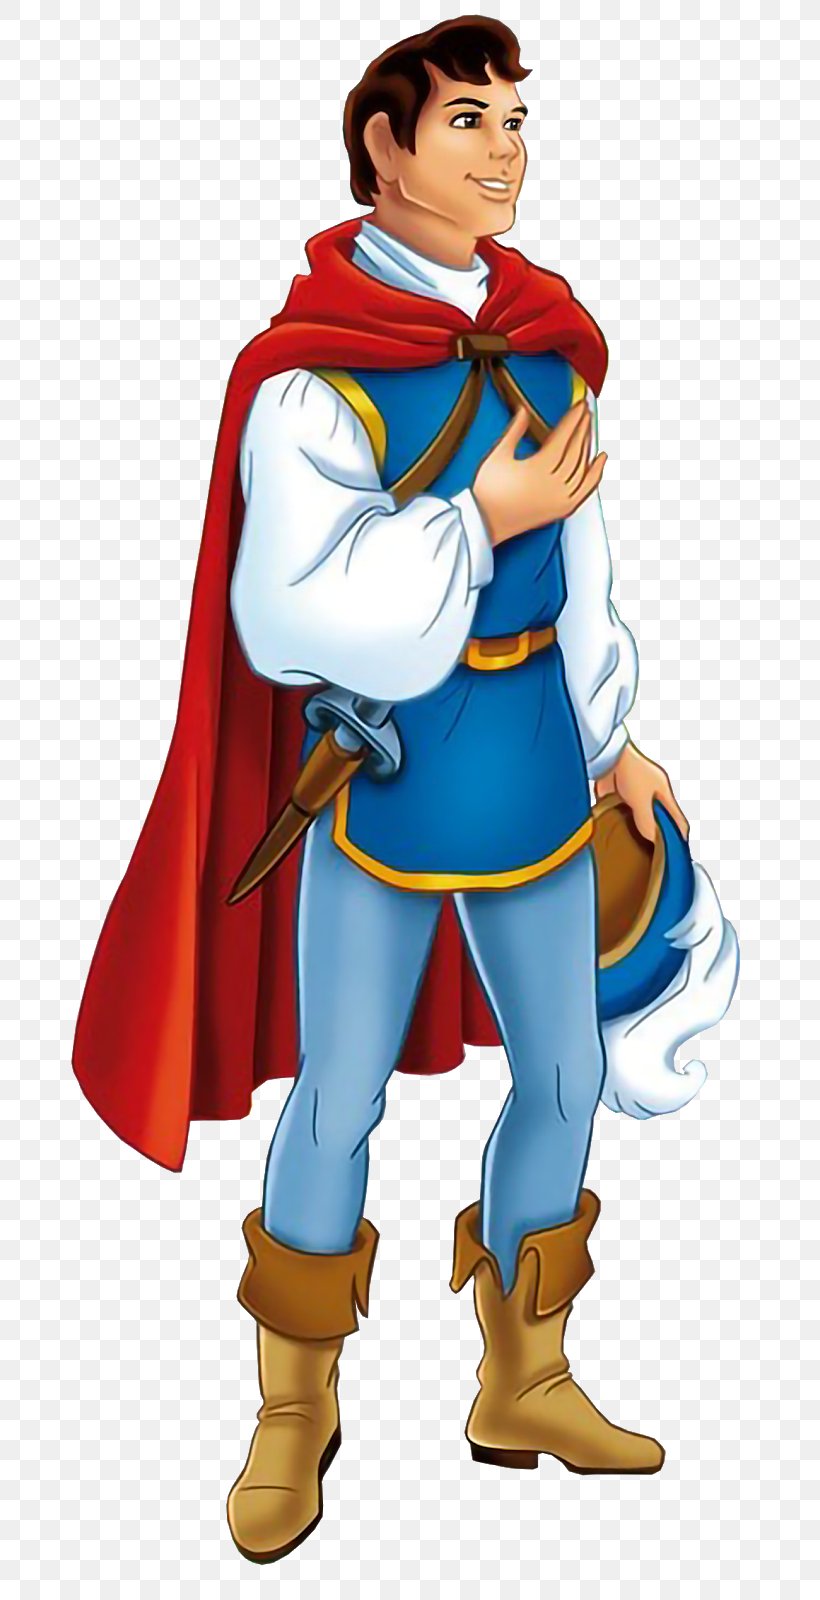 Snow White And The Seven Dwarfs Prince Charming Pinocchio Superman, PNG, 782x1600px, Snow White And The Seven Dwarfs, Action Figure, Blog, Cartoon, Costume Download Free